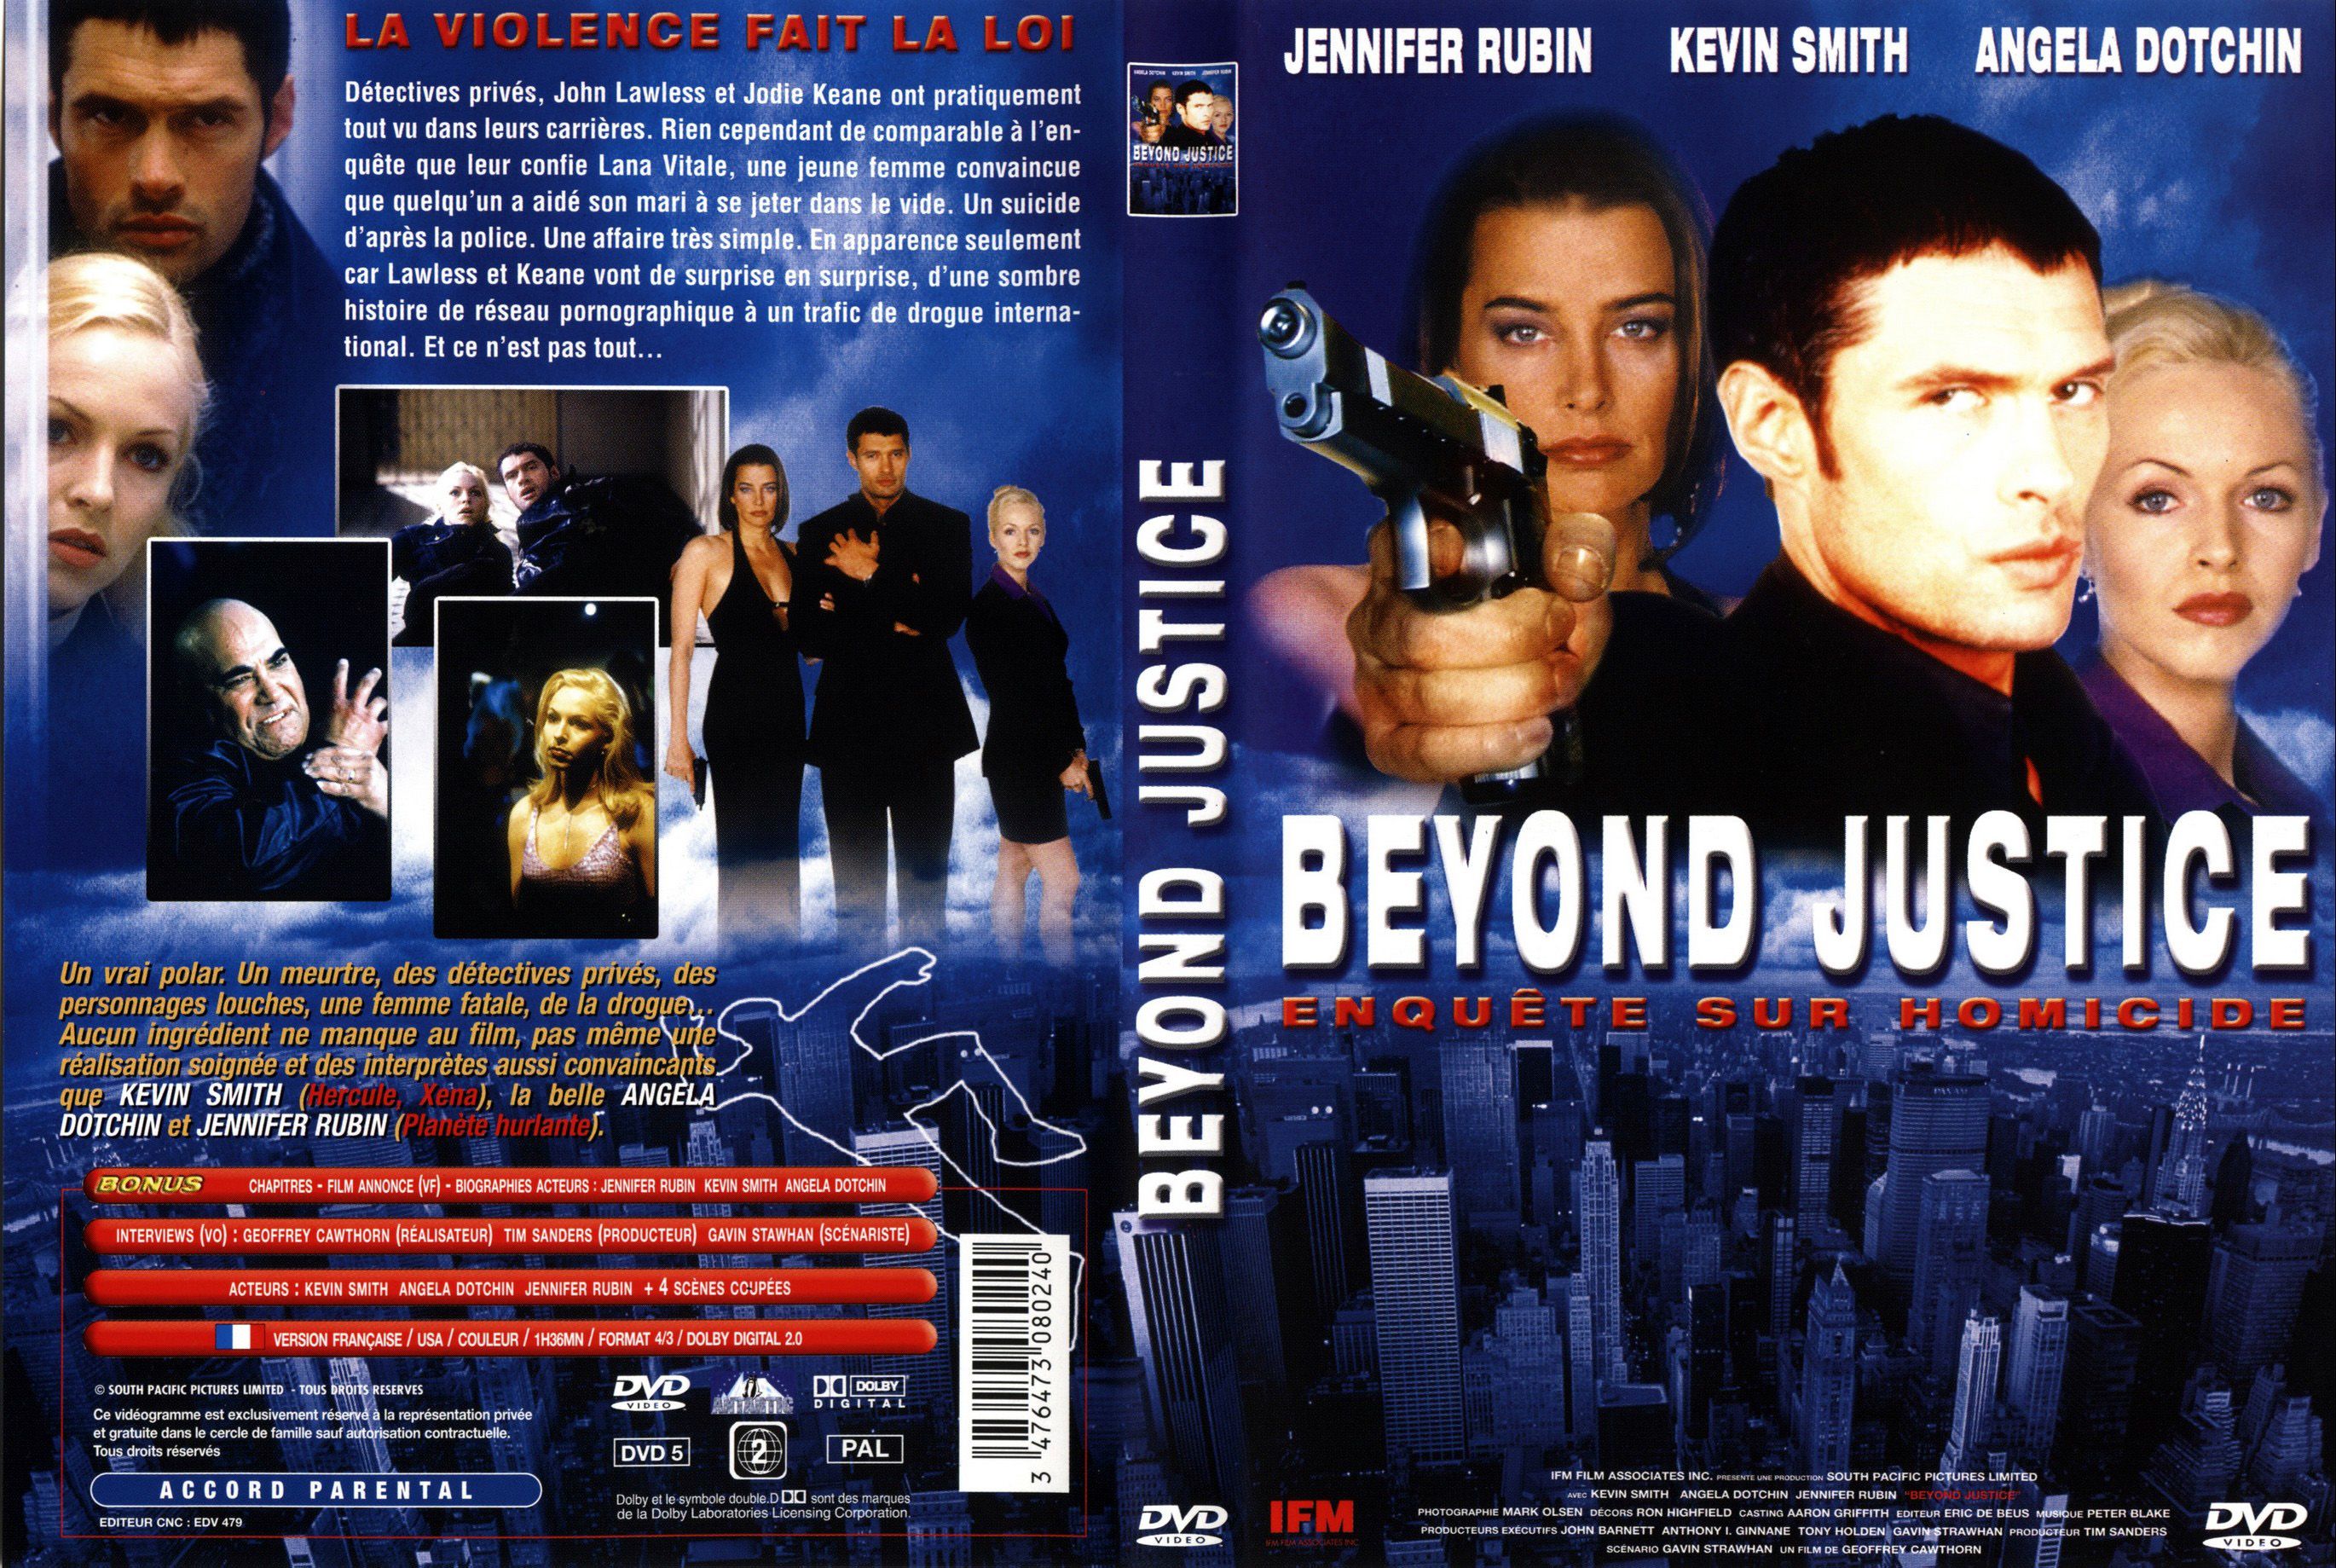 Jaquette DVD Beyond justice